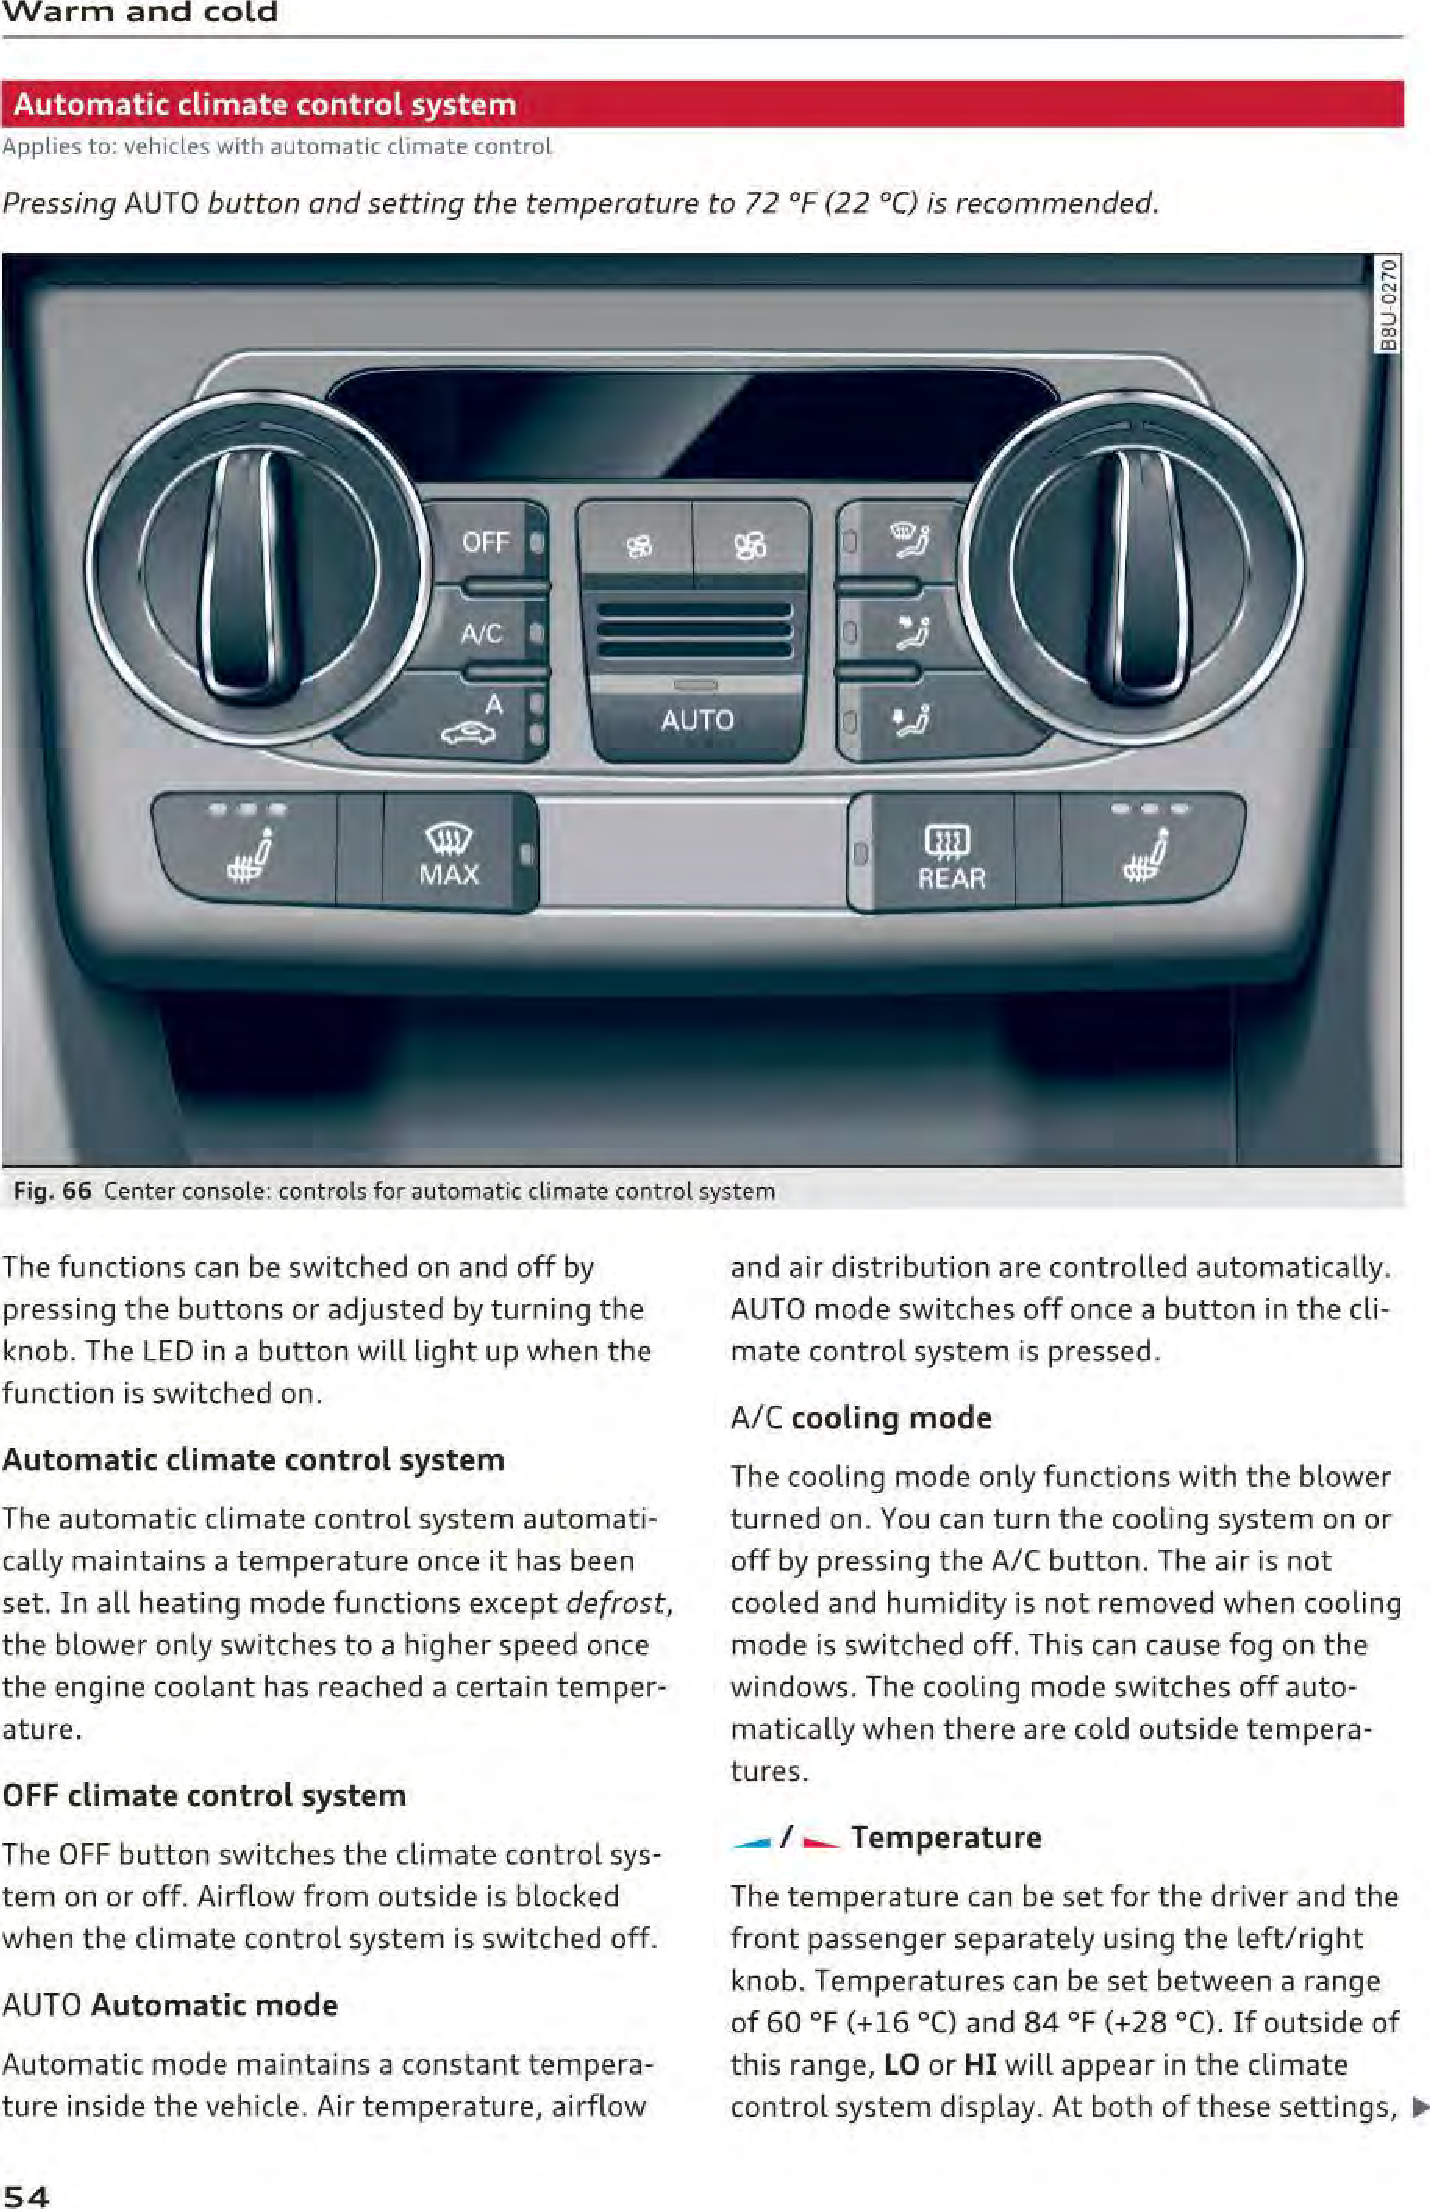 Page 56 of Robert Bosch Car Multimedia AUFPK20 Instrument cluster with immobilizer User Manual part 1